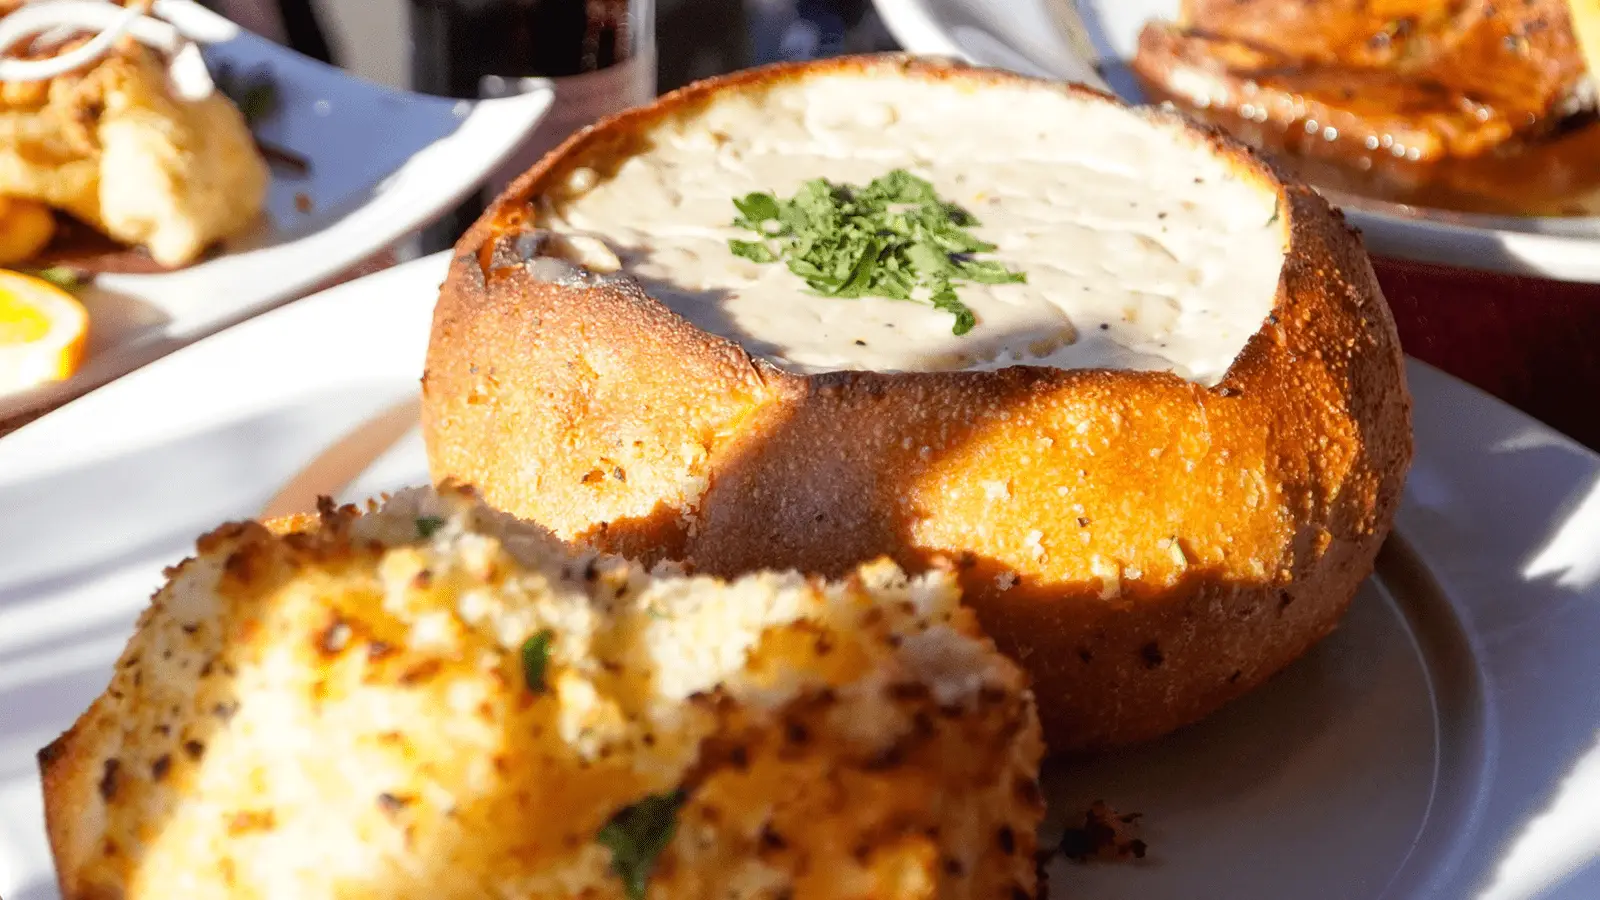 Old-Fishermans-Grotto-Monterey-Peninsula-Clam-Chowder-credit-Old-Fishermans-Grotto-800x450-1.png